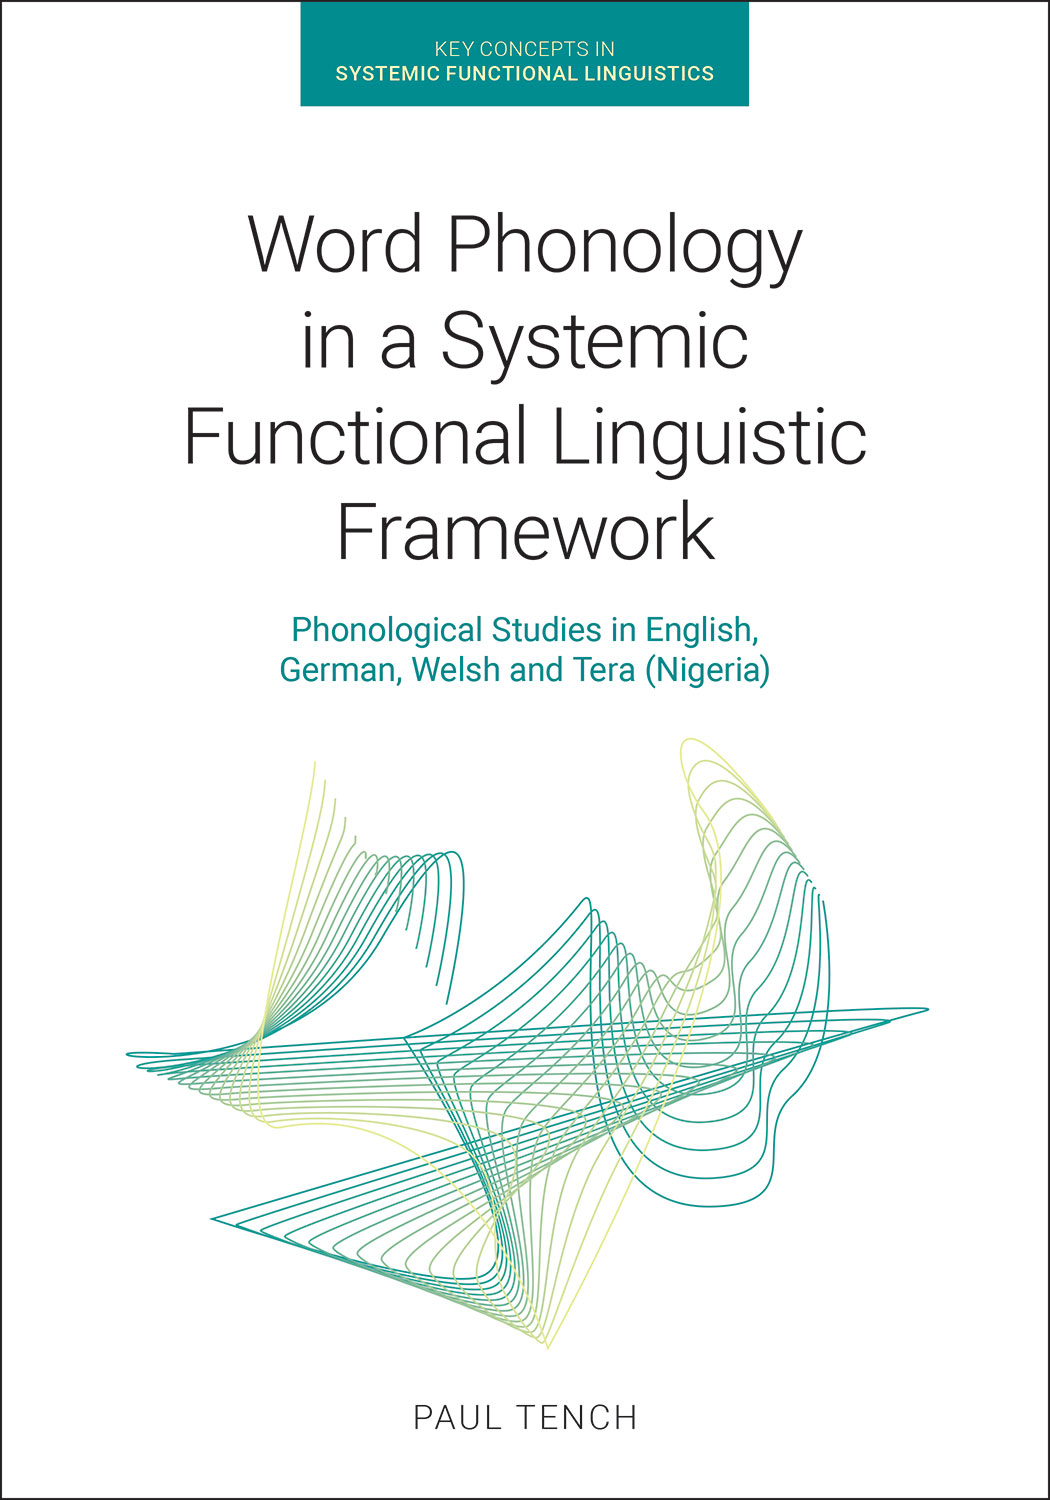 Word Phonology in a Systemic Functional Linguistic Framework